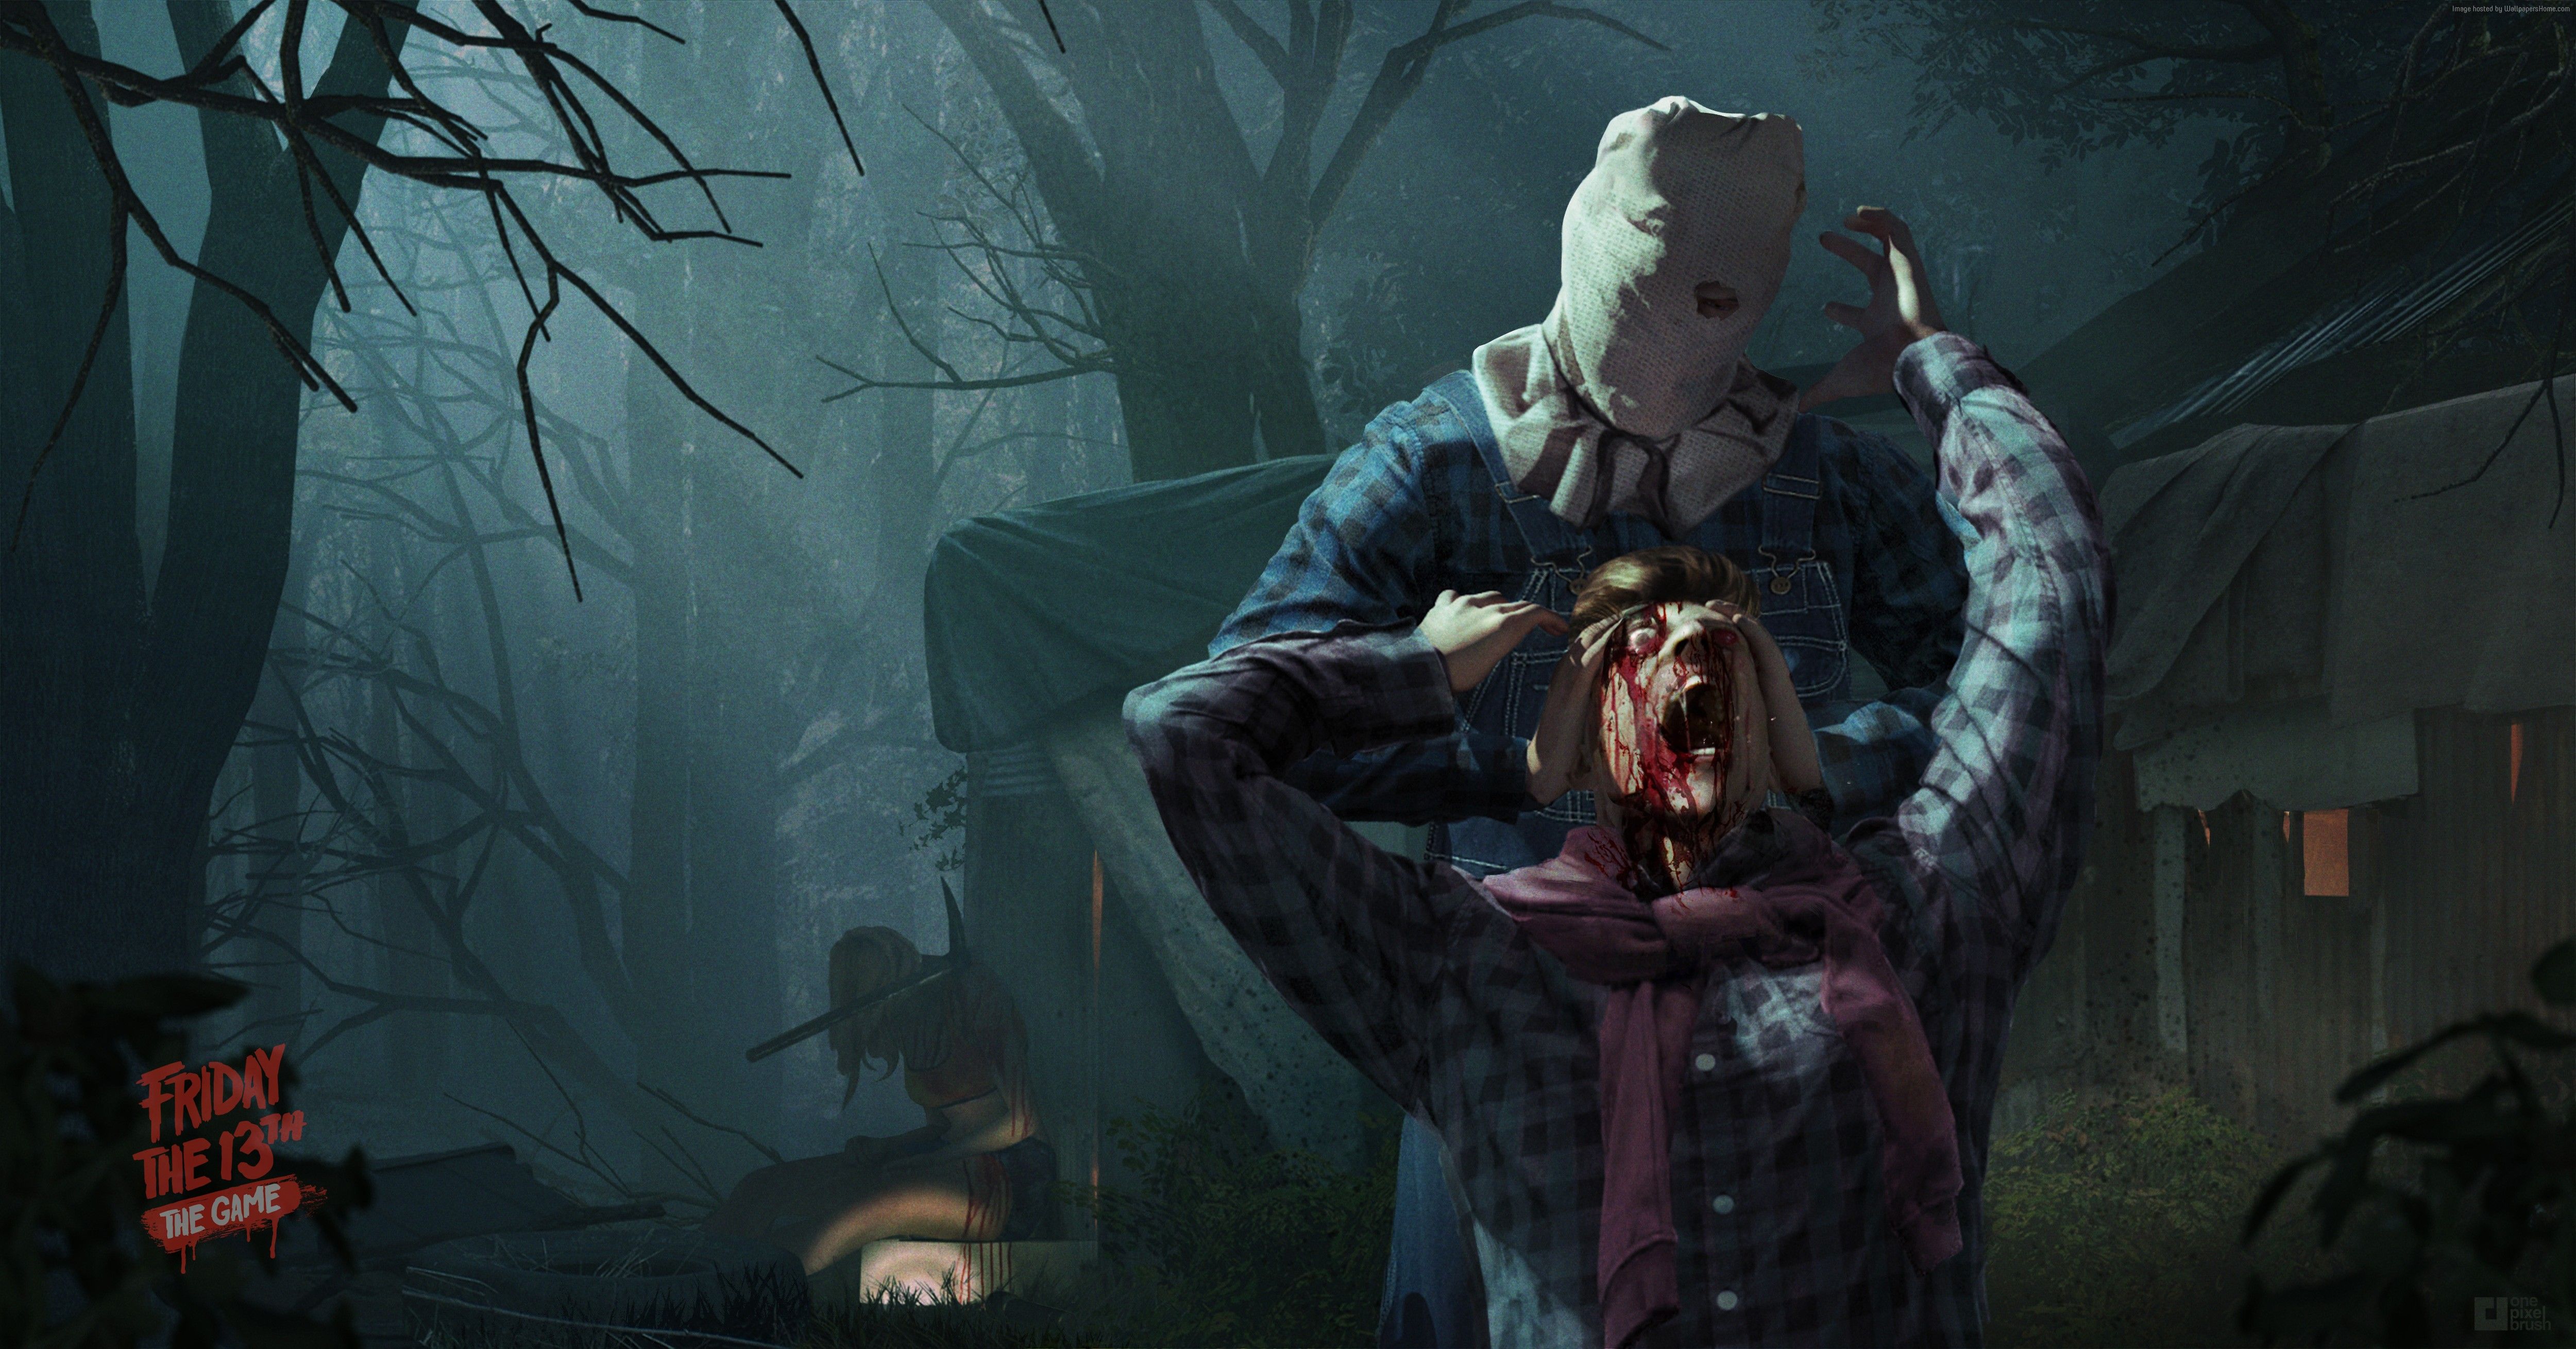 Wallpaper Friday the 13th: The Game, Best Game, horror, PC, PS4